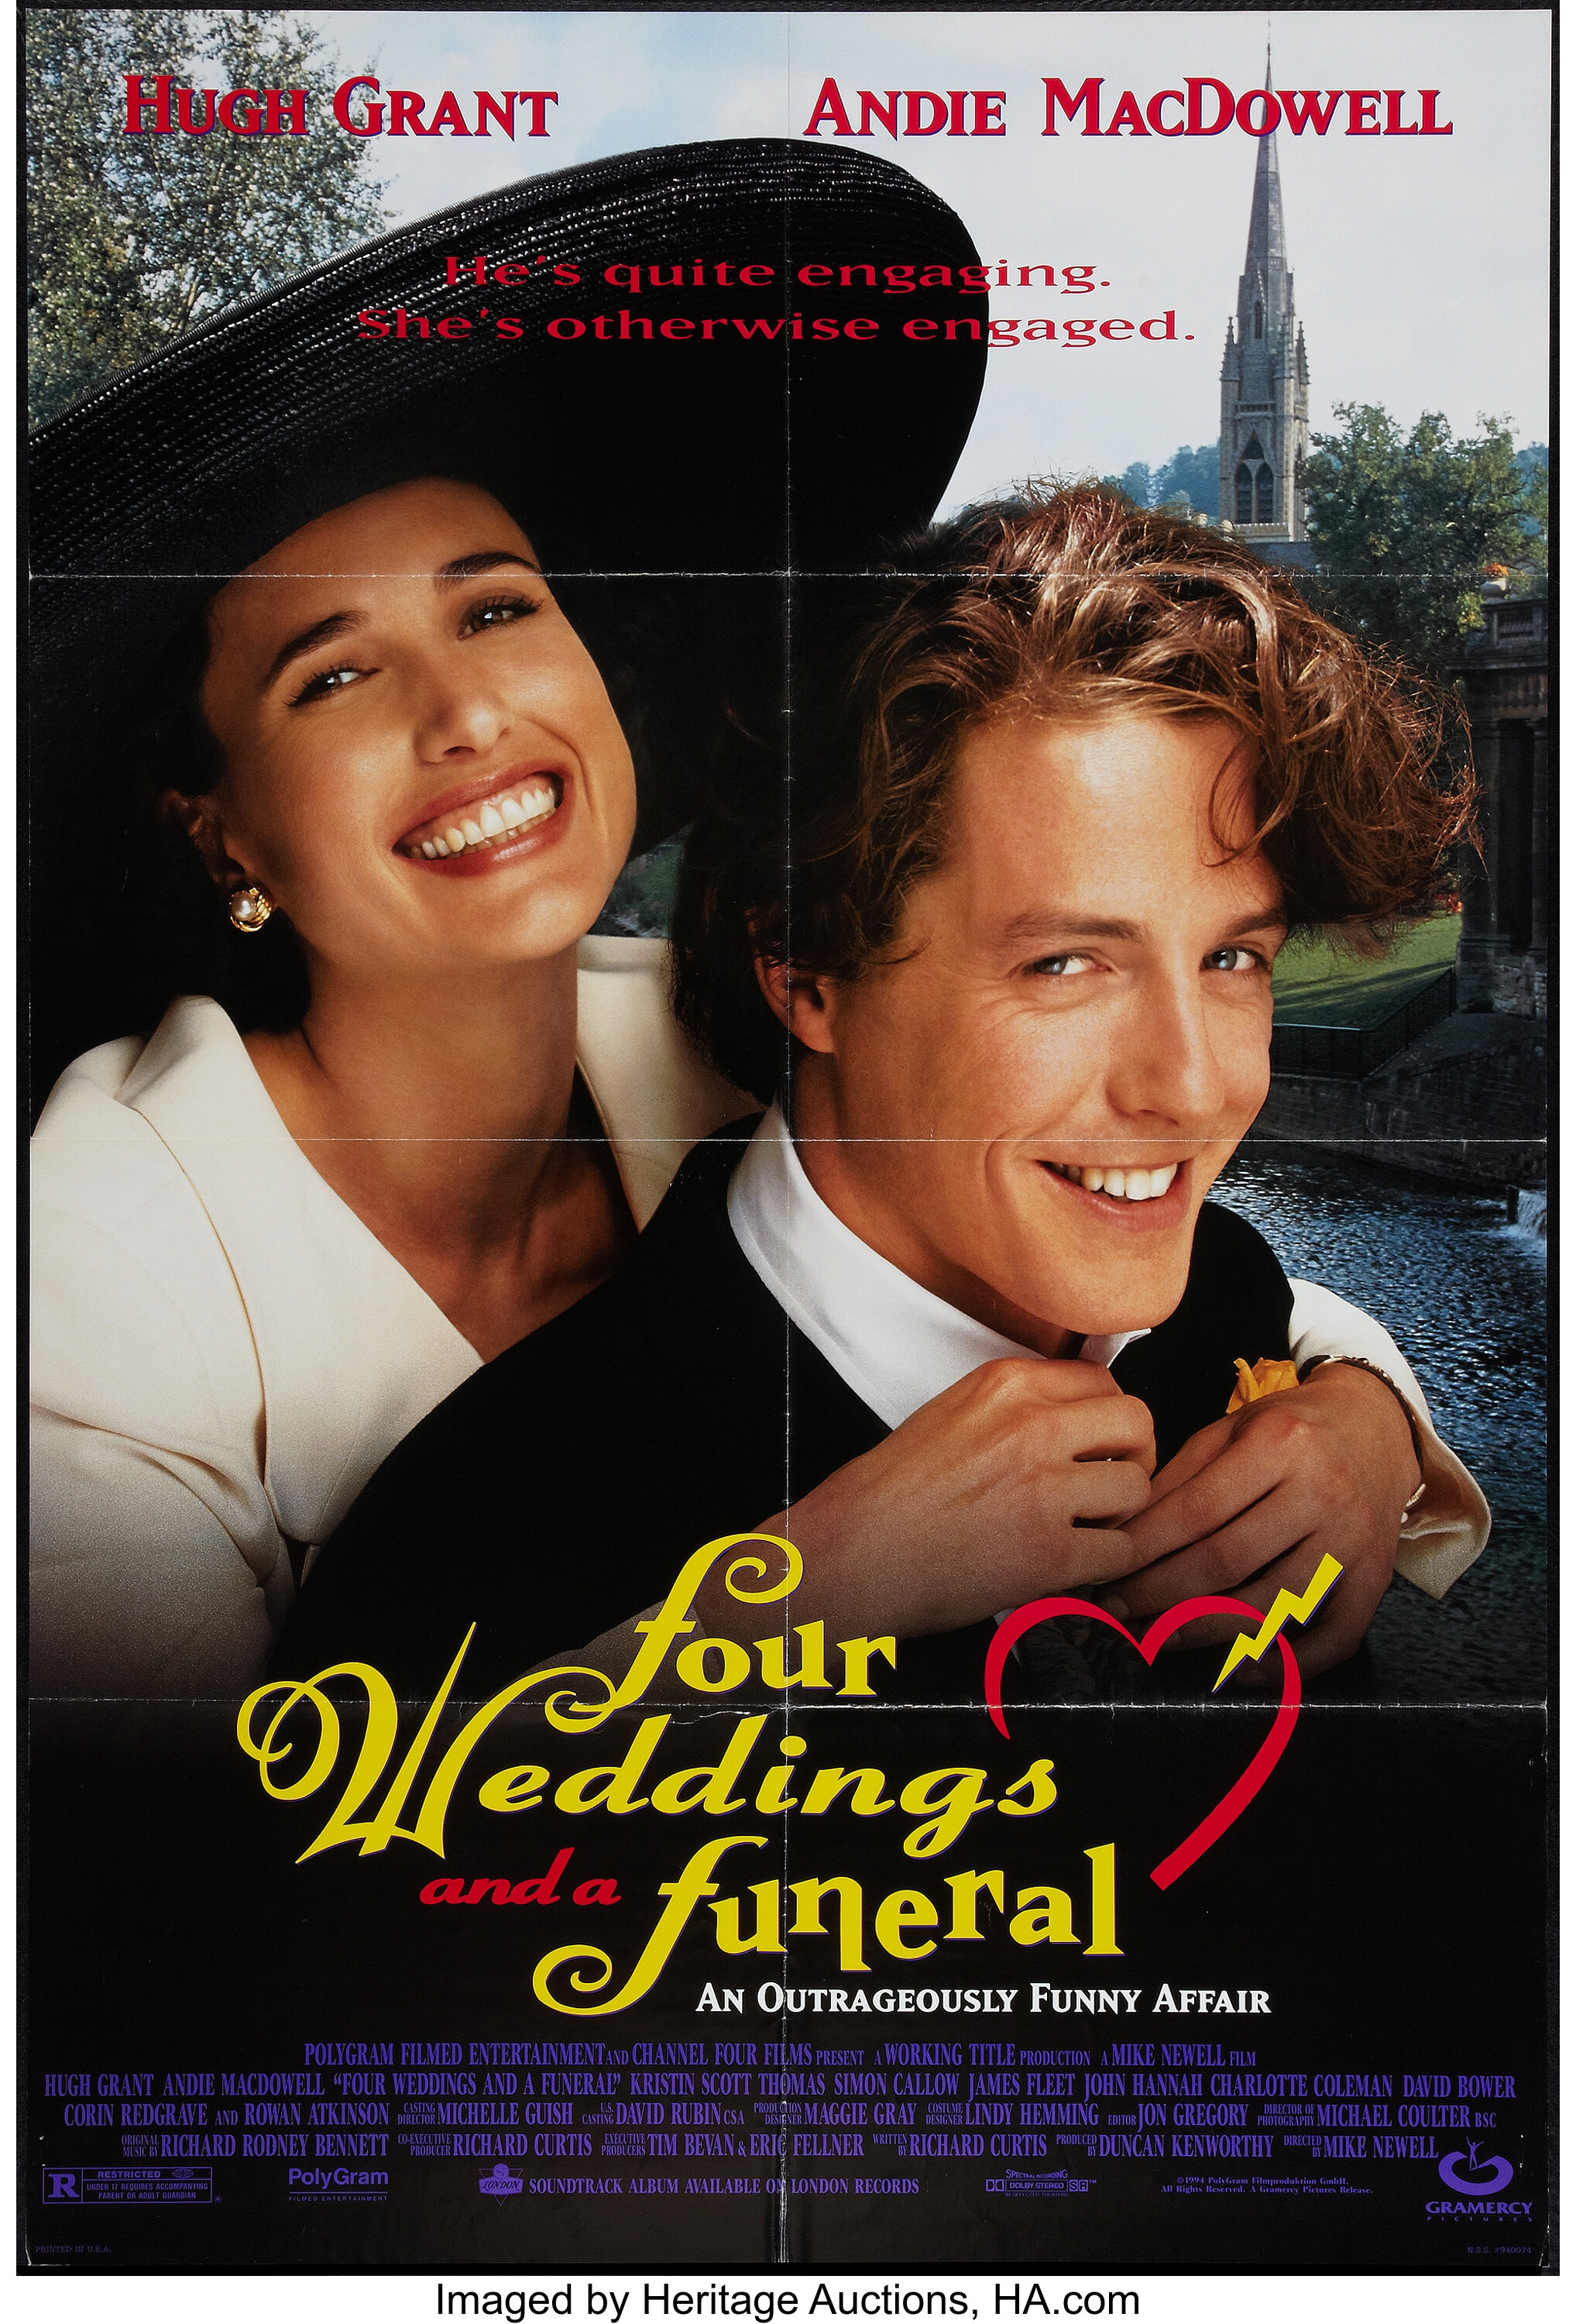 Four Weddings And A Funeral Others Lot Gramercy 1994 One Lot 50157 Heritage Auctions